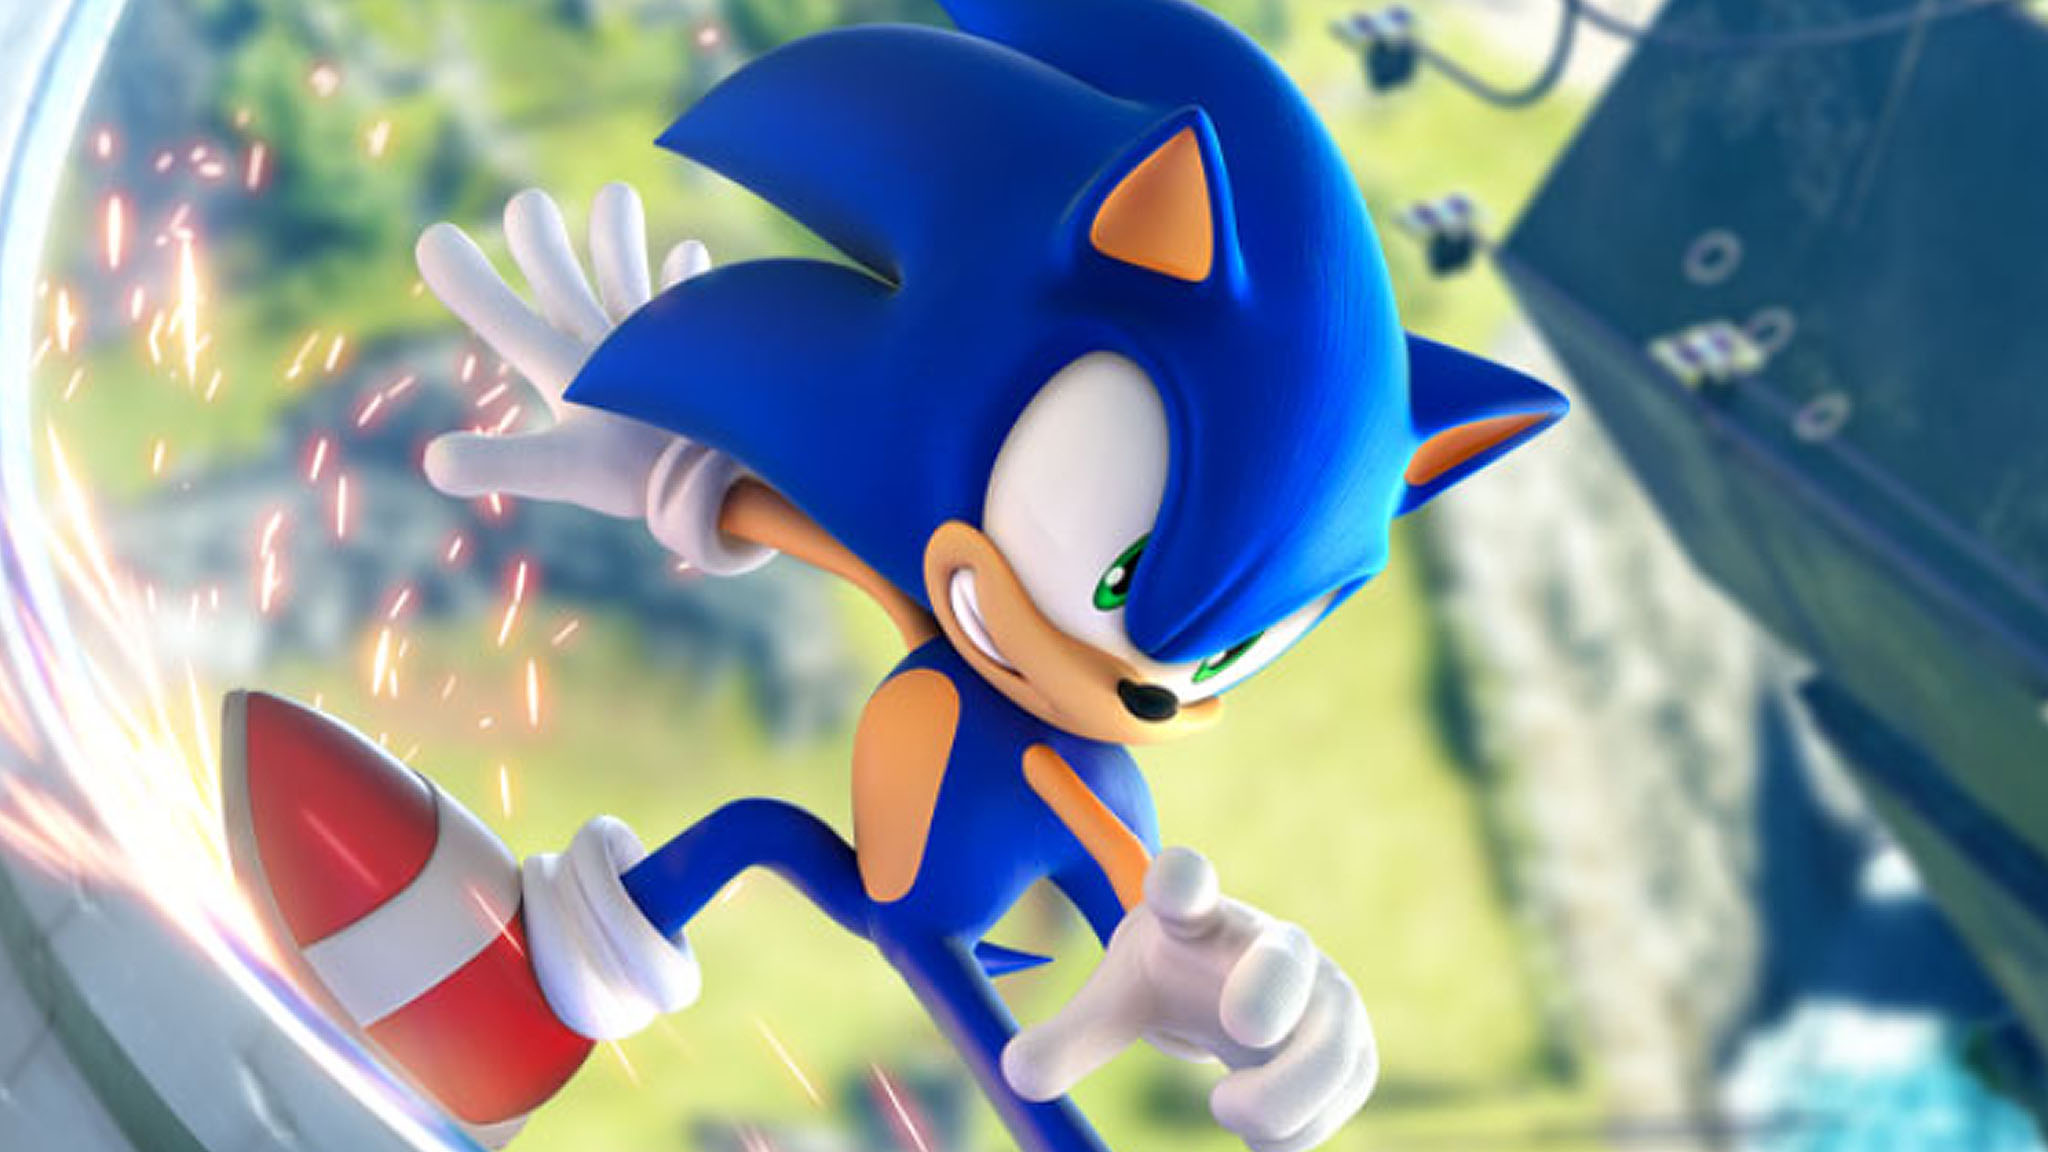 Sonic voice cast to return, Amy confirmed mysterious voice in